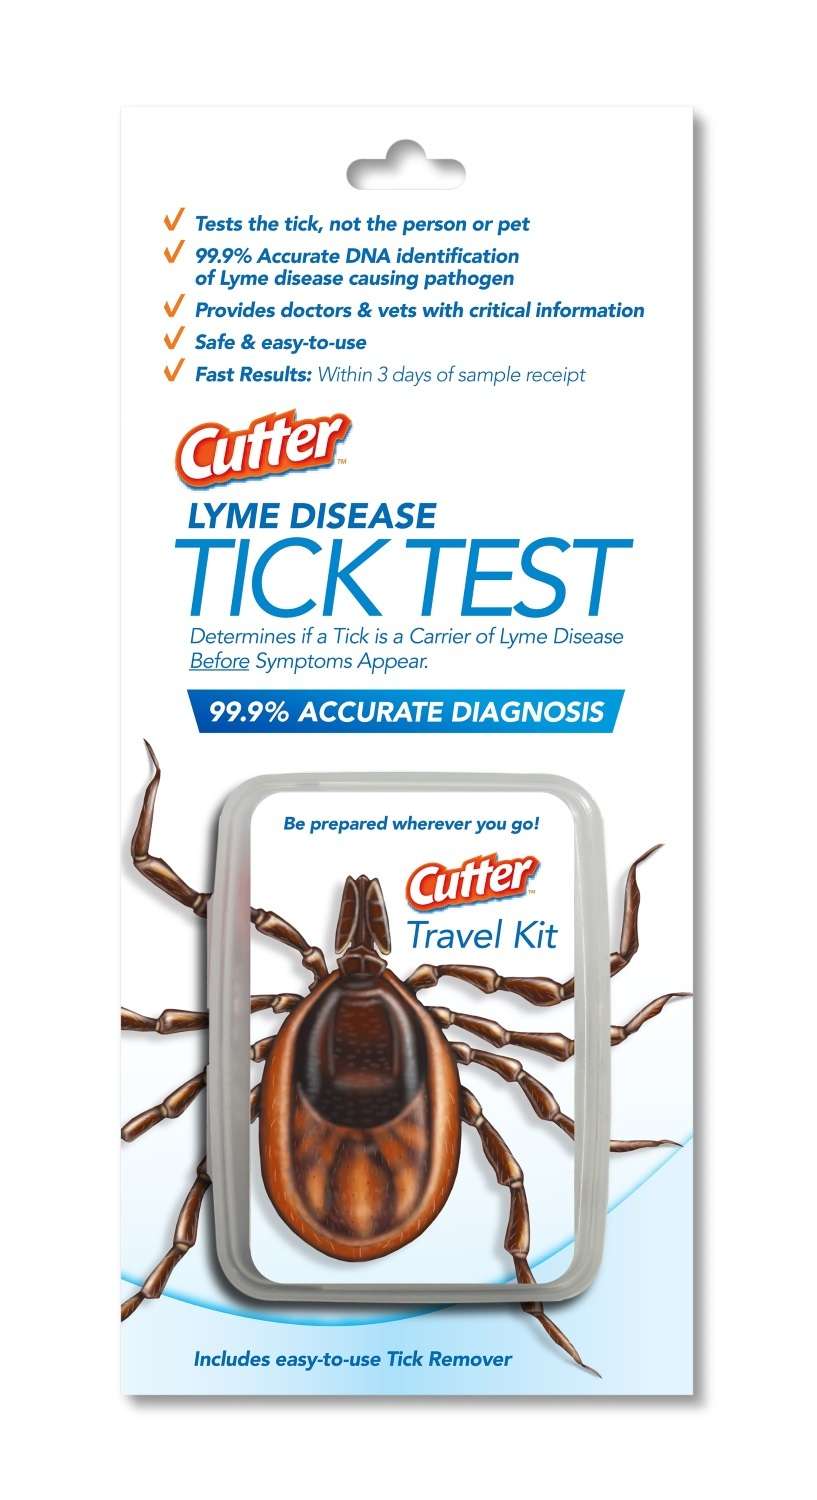 Cutter Lyme Disease Tick Test Travel Kit 99.9% Accurate ...